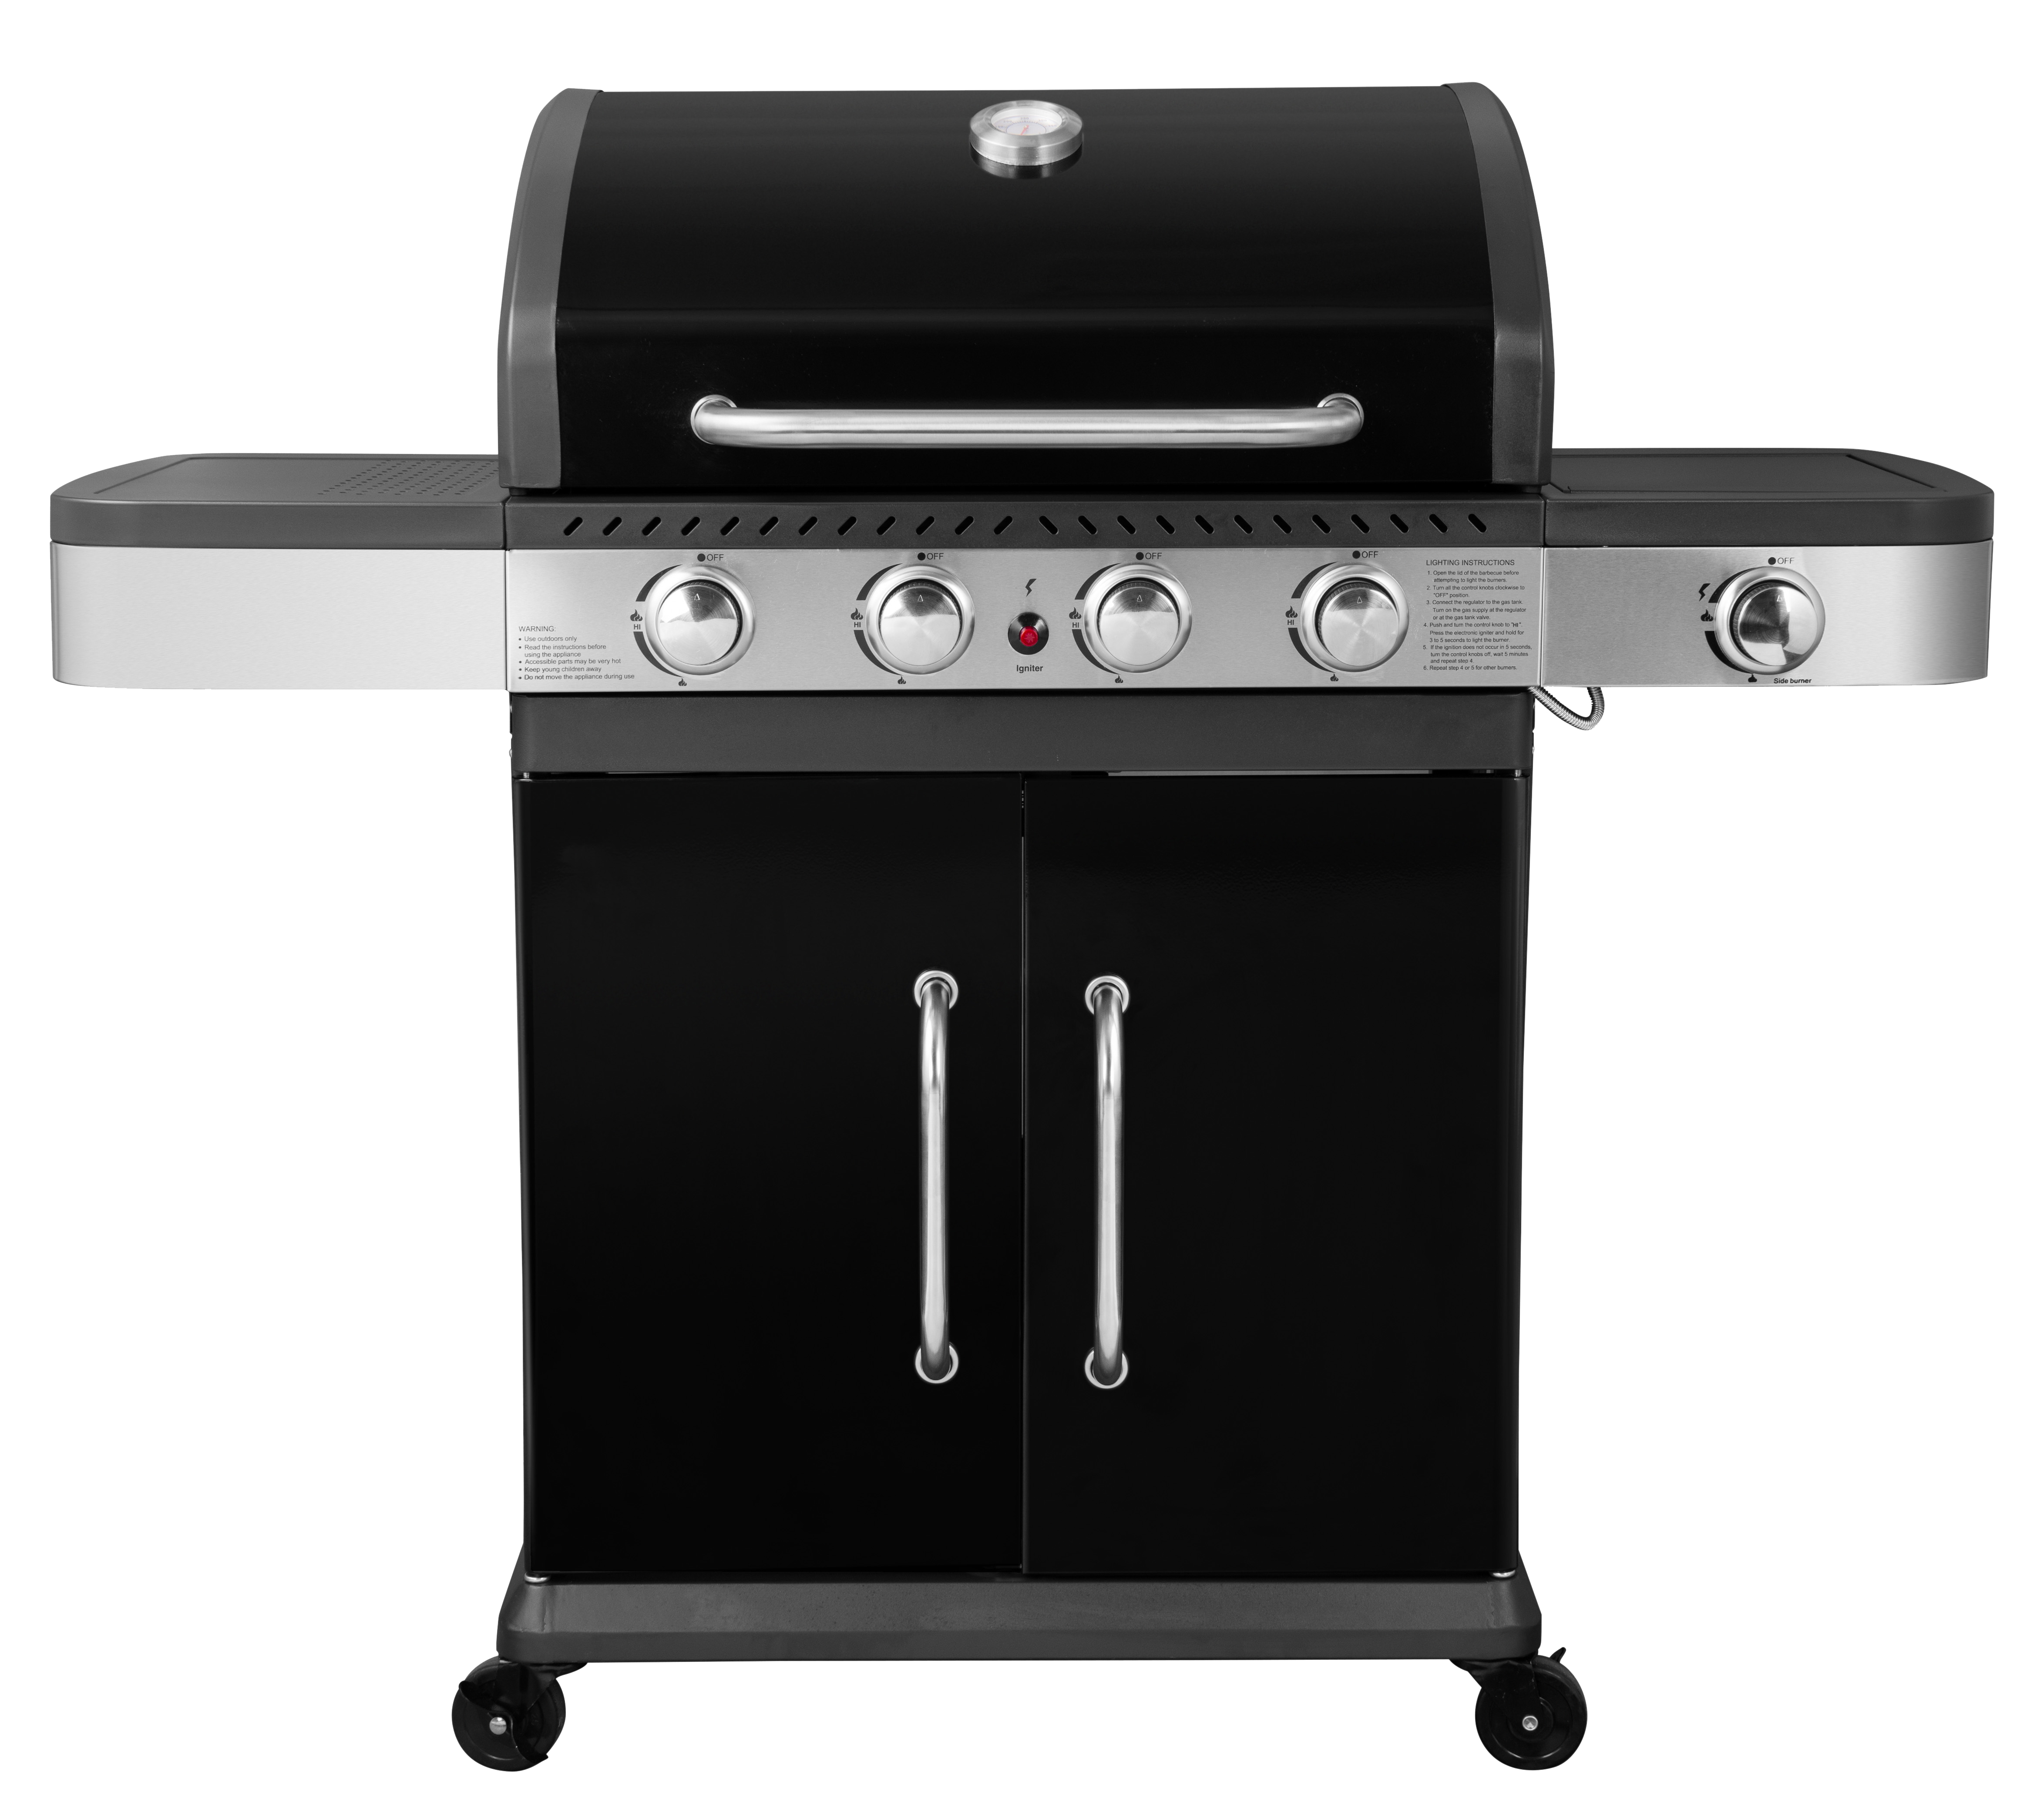 Gas Barbeque Premium with 4 Burners and a side cob Unimac - 1